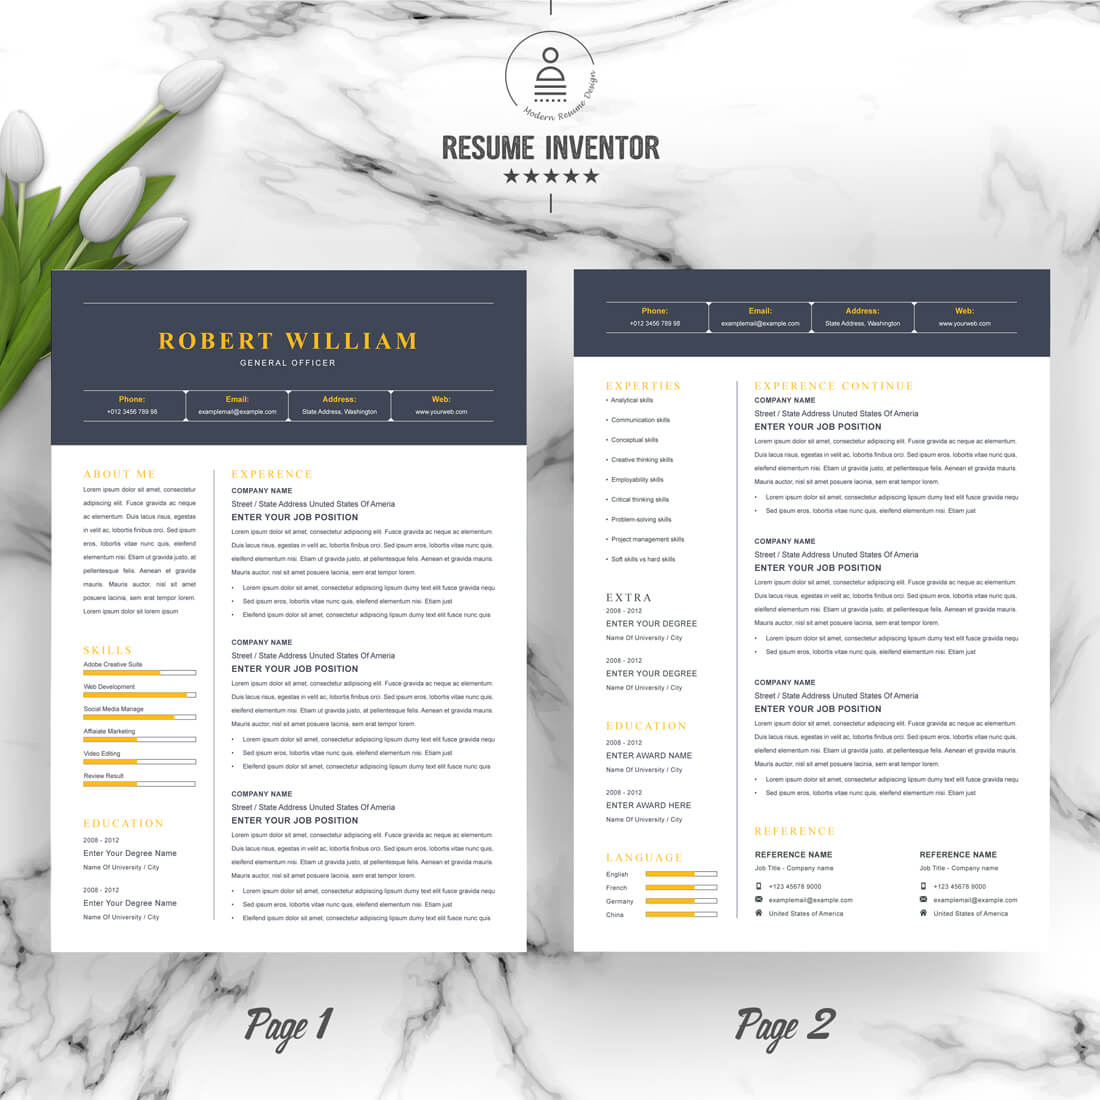 General Officer Resume & CV Template | Pages, Word, Eps, & INDD Format Design Template preview image.